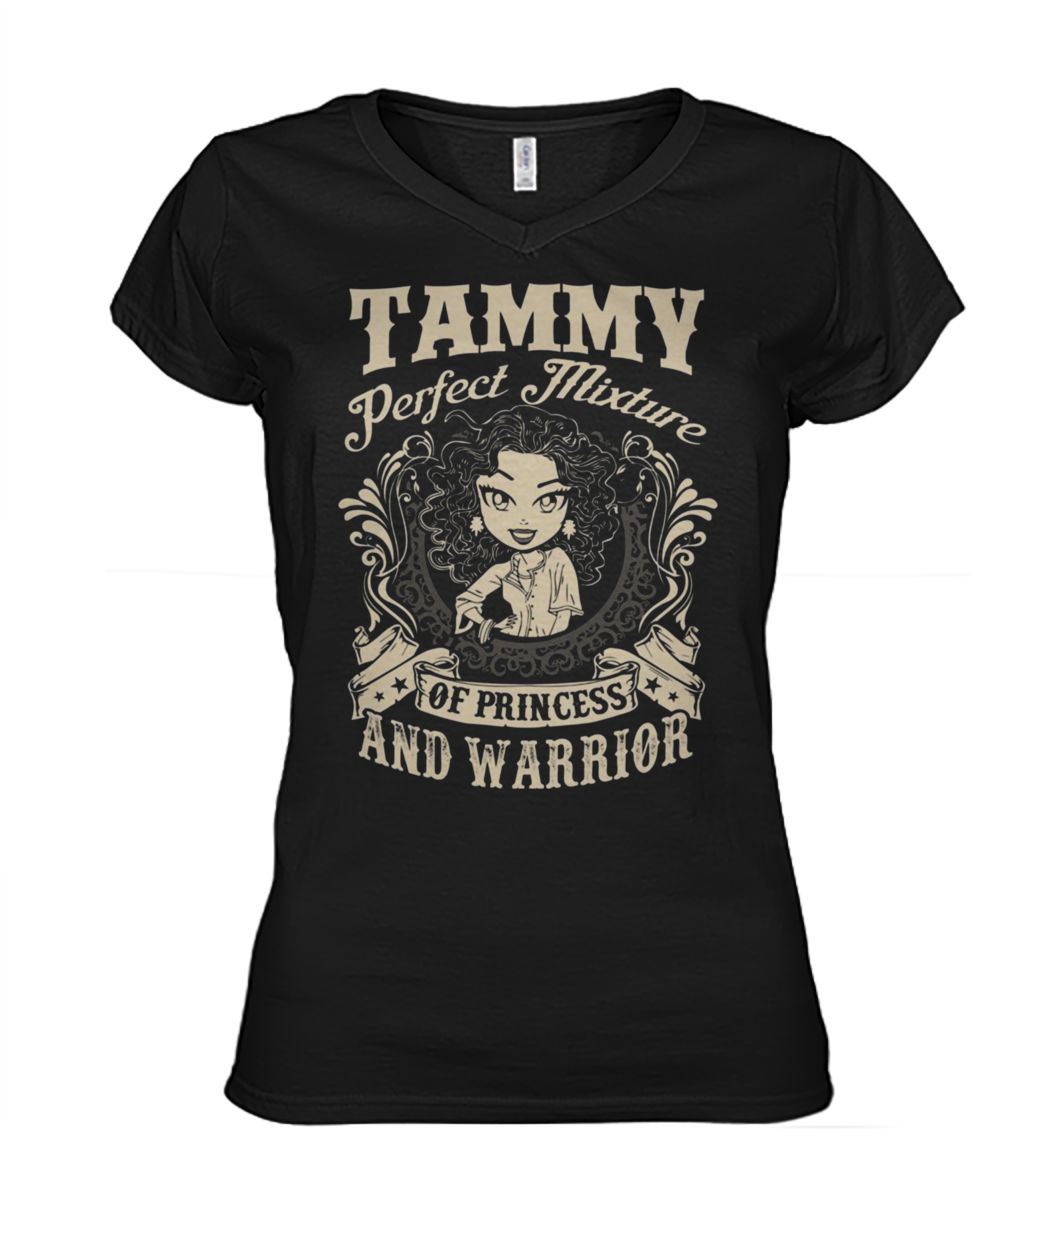 Tammy perfect combination of a princess and warrior women's v-neck